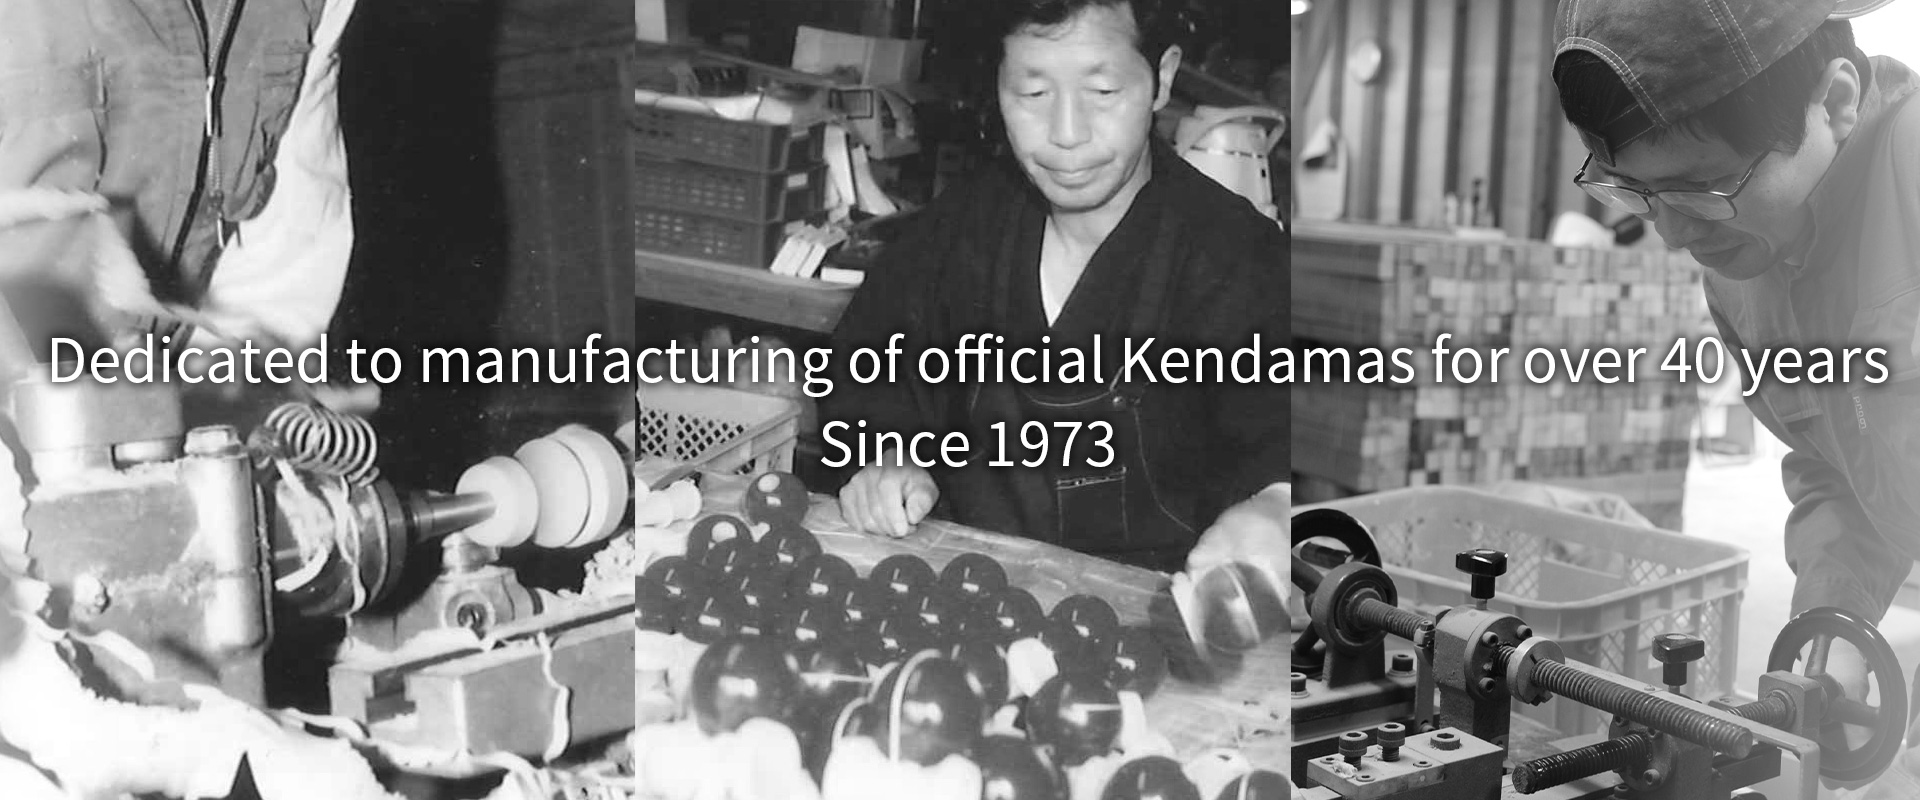 Dedicated to manufacturing of official Kendamas for over 40 years Since 1973